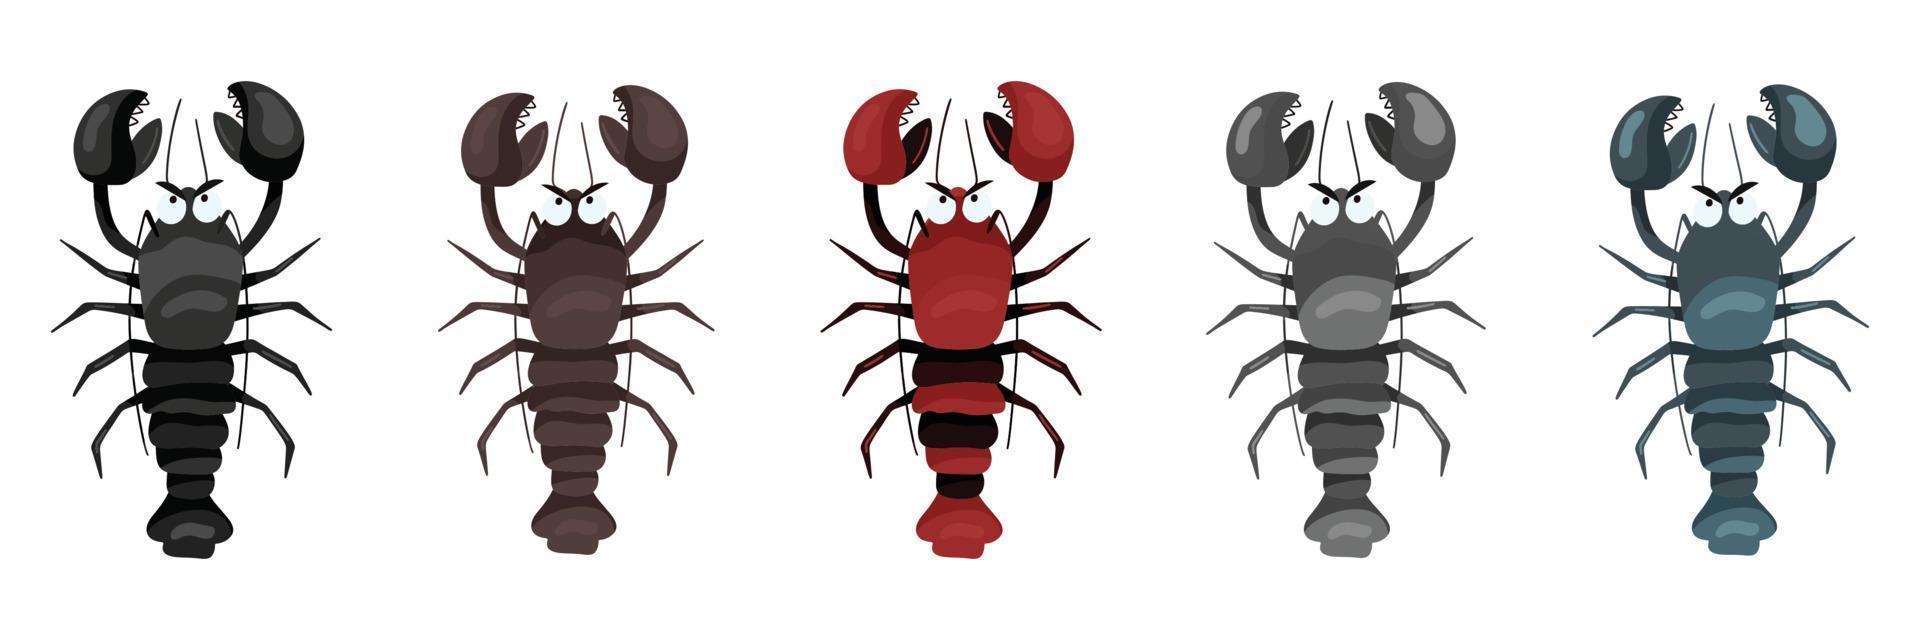 Set of drawings of sea crayfish in different colors. Vector horizontal illustration in cartoon style, isolated on white background.